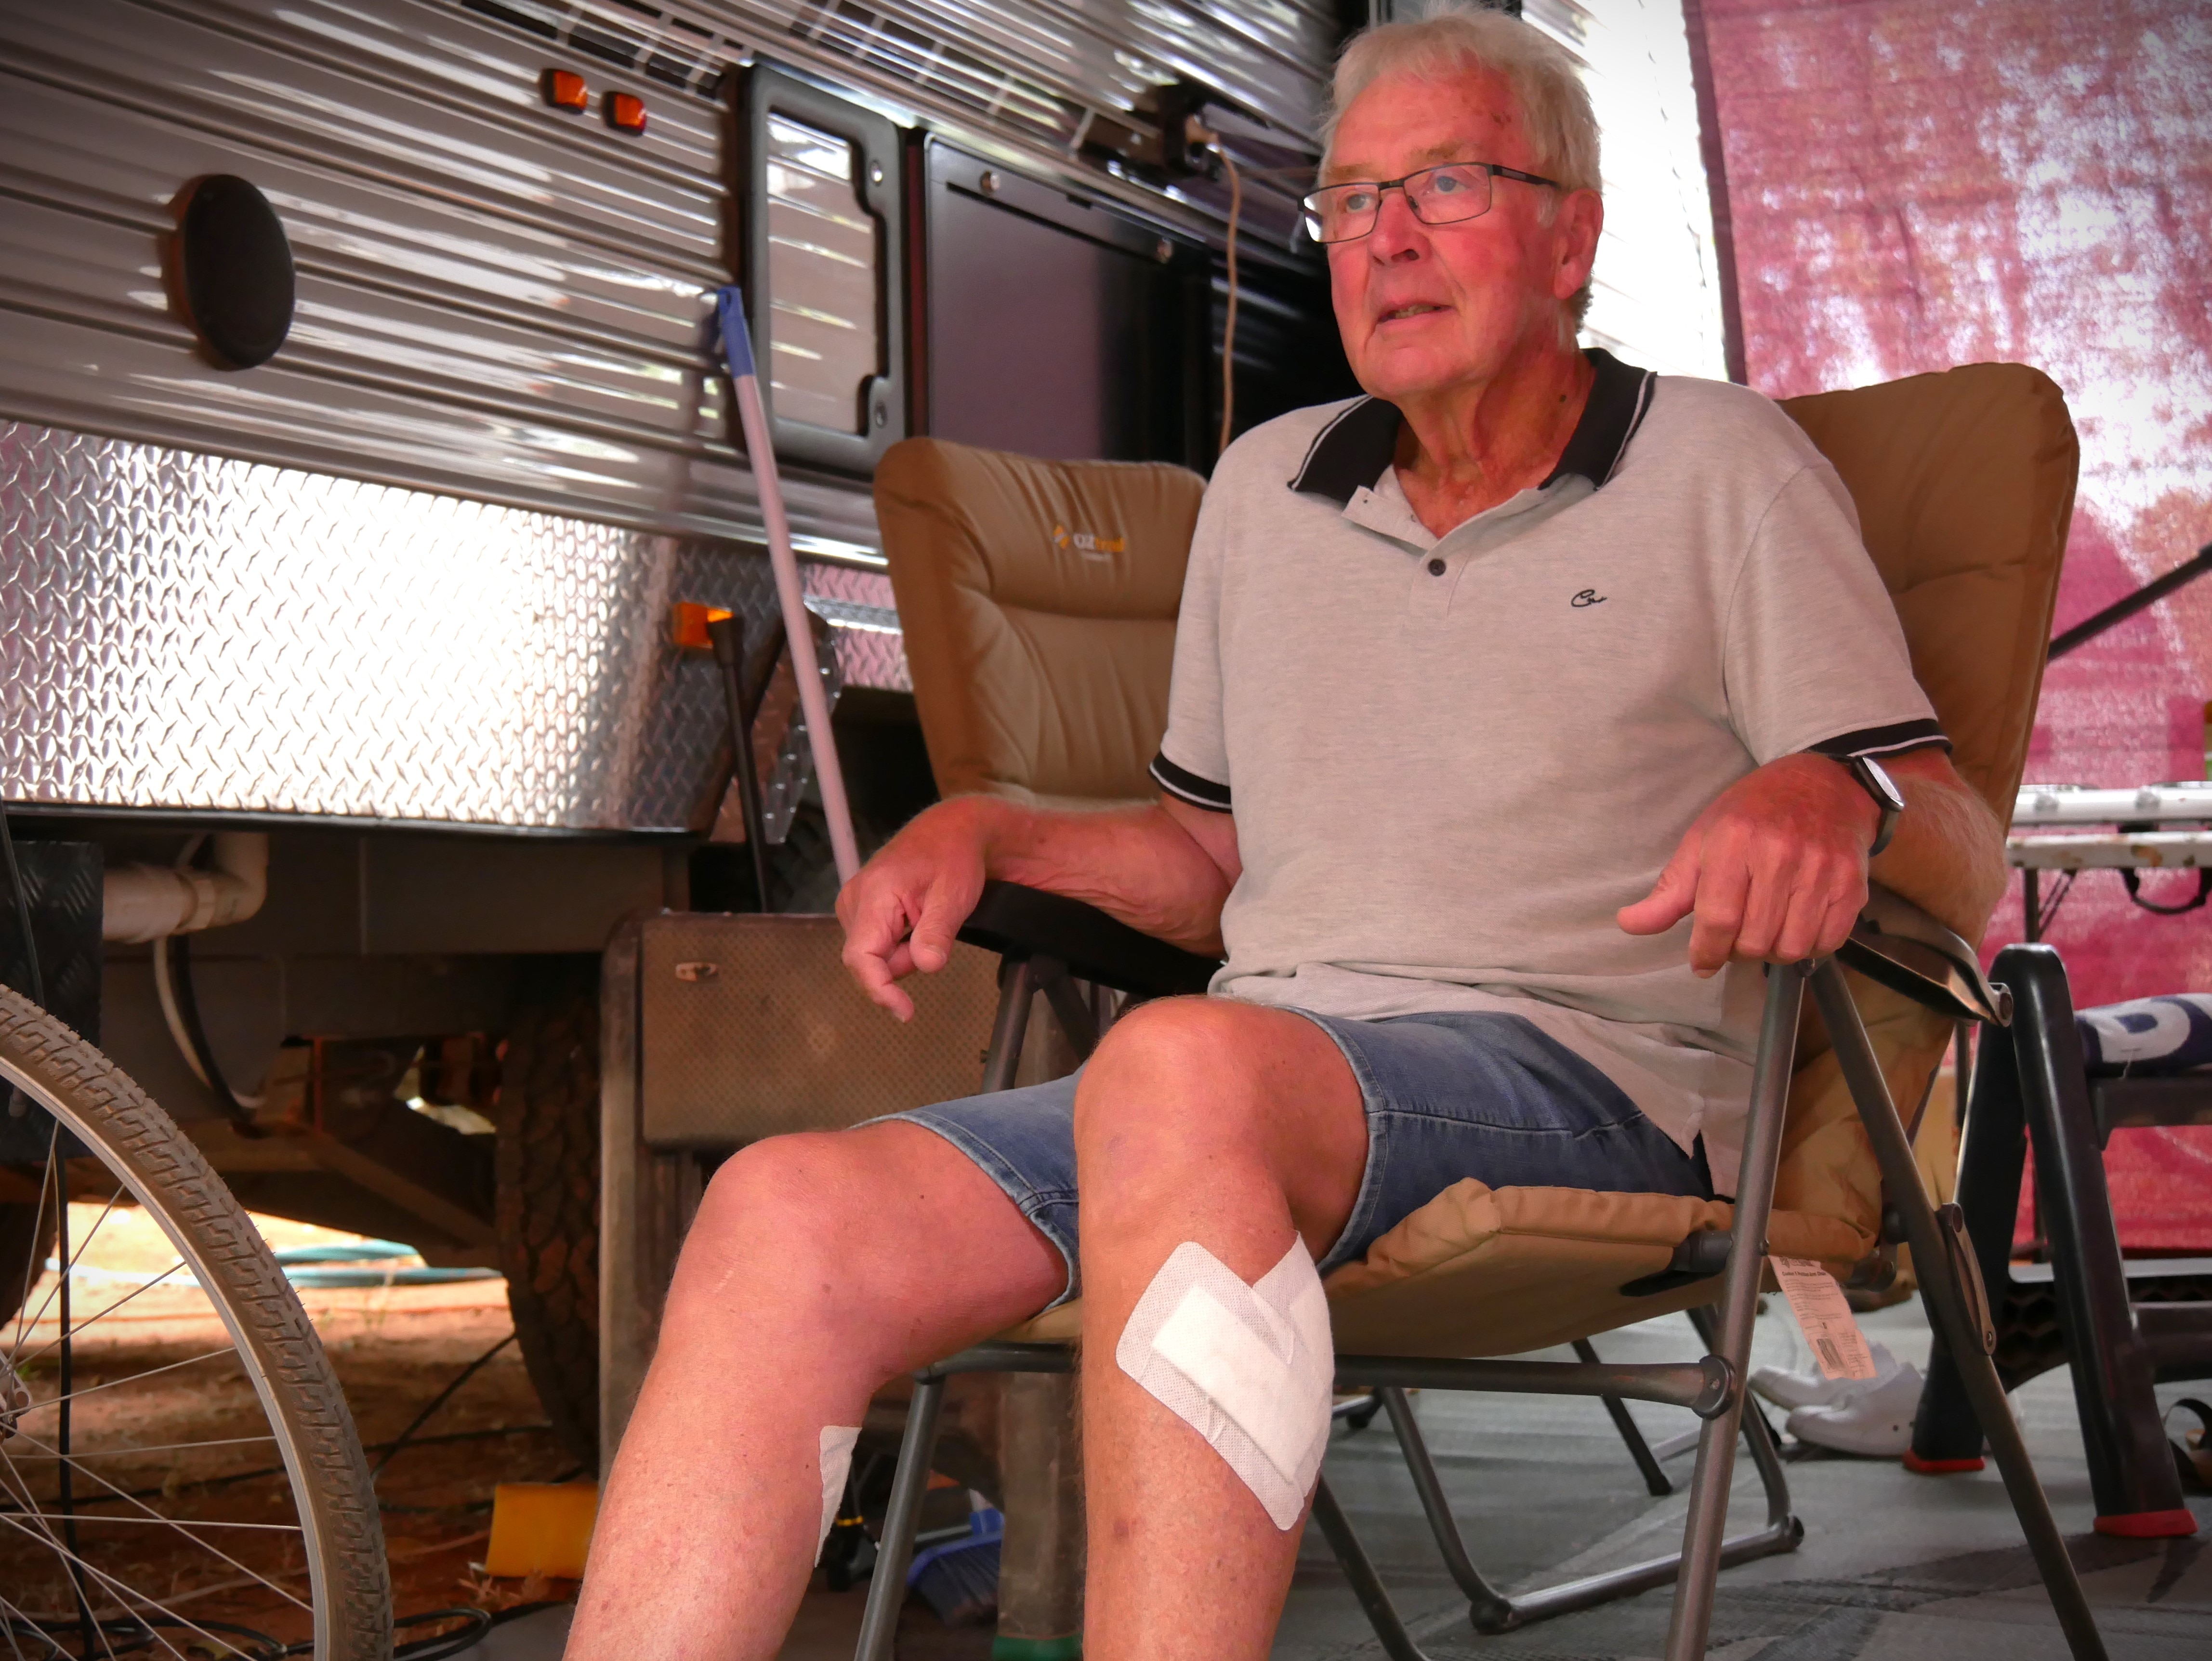 An elderly man sitting on a deck chair with a bandage on his leg